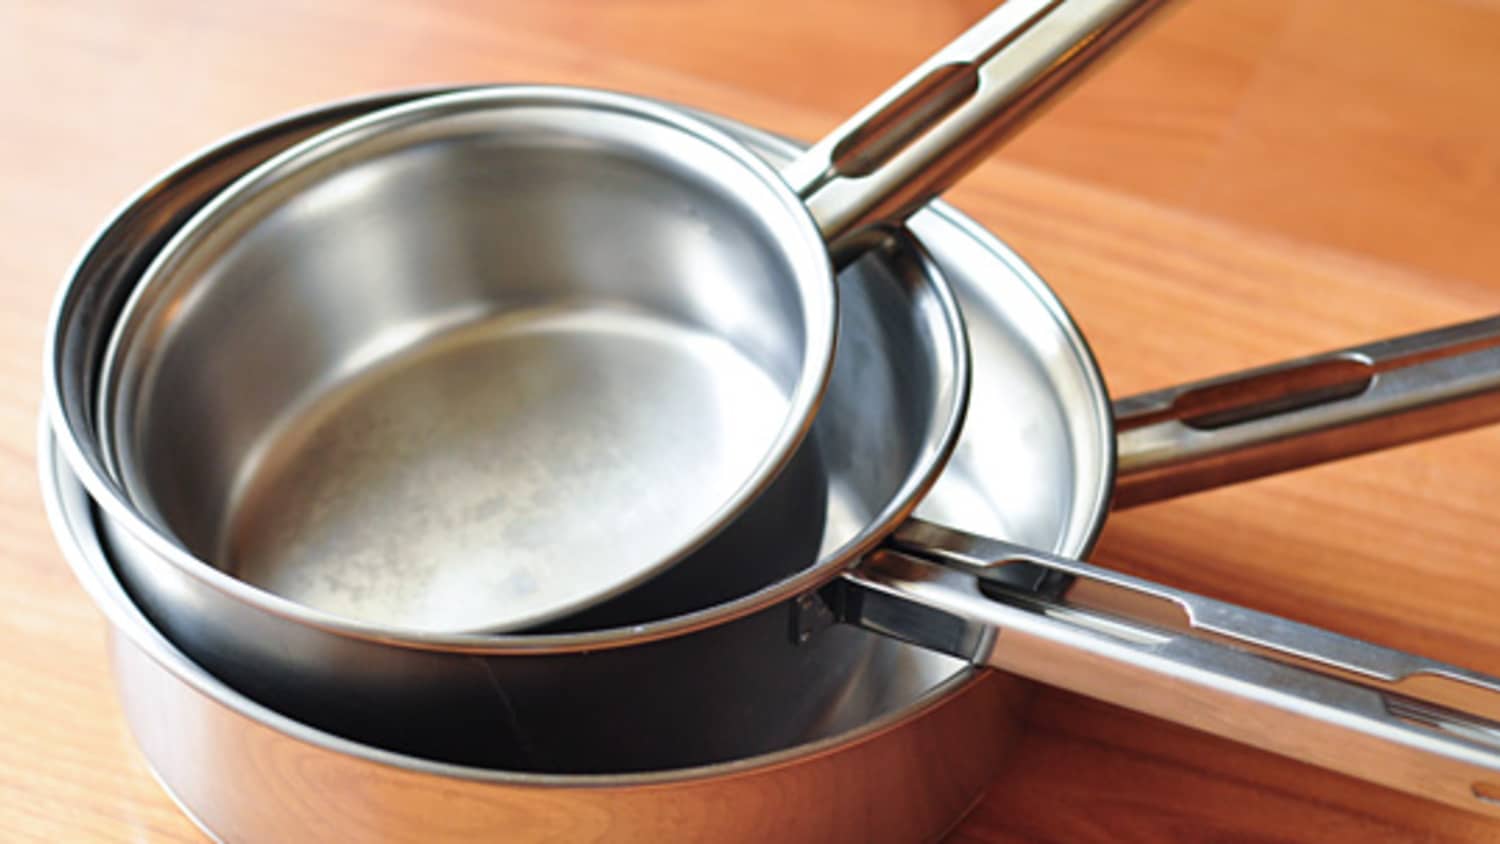  8 (20cm) 18/10 Tramontina Stainless Steel Saute / Frying Sauce Skillet  Fry Pan: Tramontina Tri Ply: Home & Kitchen